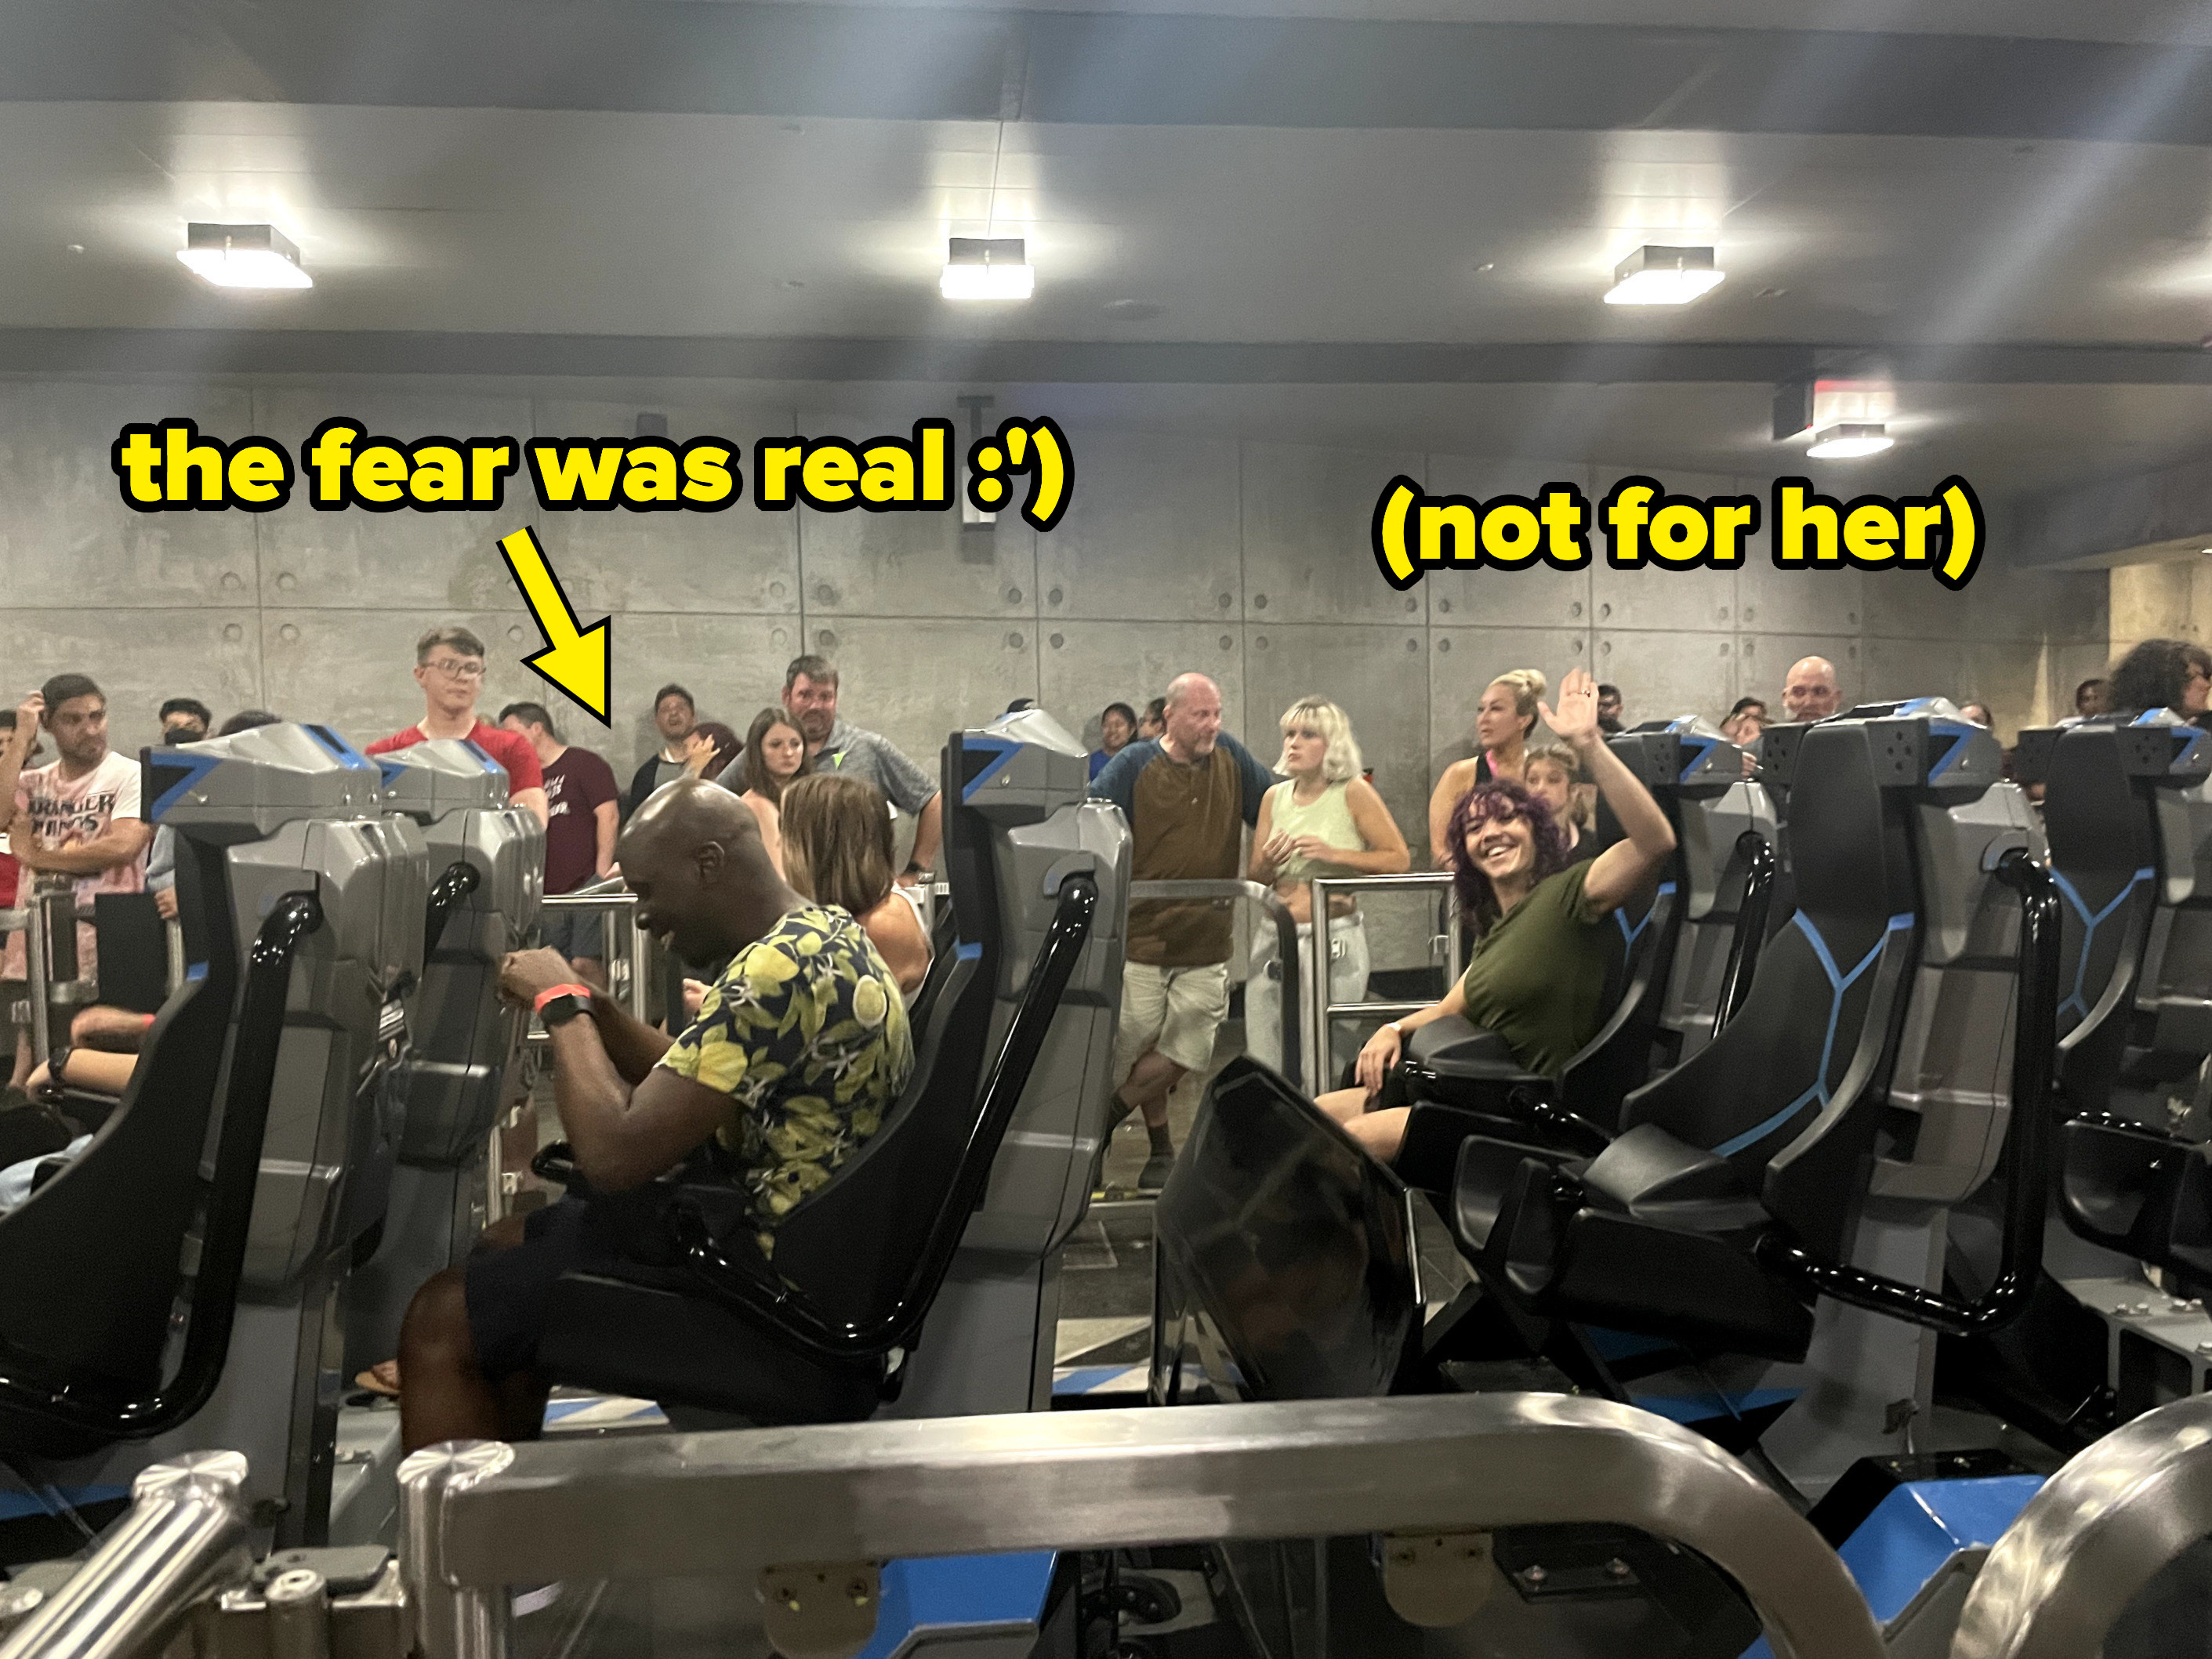 the author sitting on the ride with the words &quot;The fear was real&quot; and a girl waving happily with the words &quot;not for her&quot;